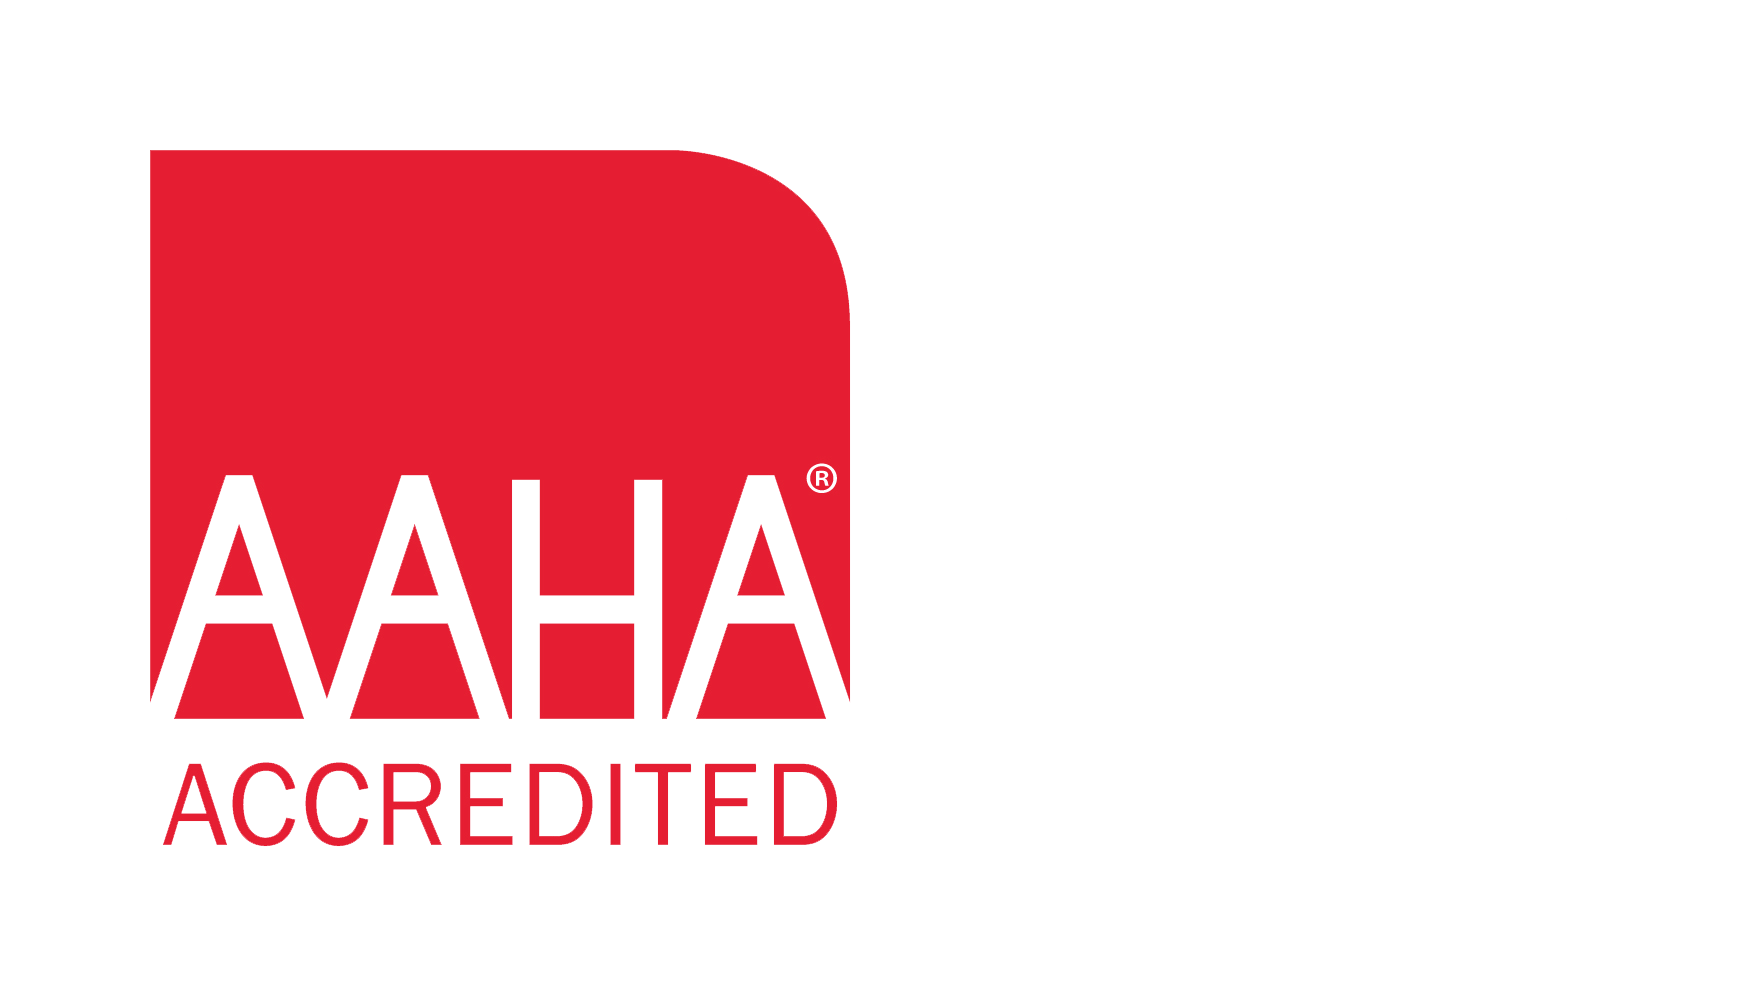 Certification badge for being AAHA accredited